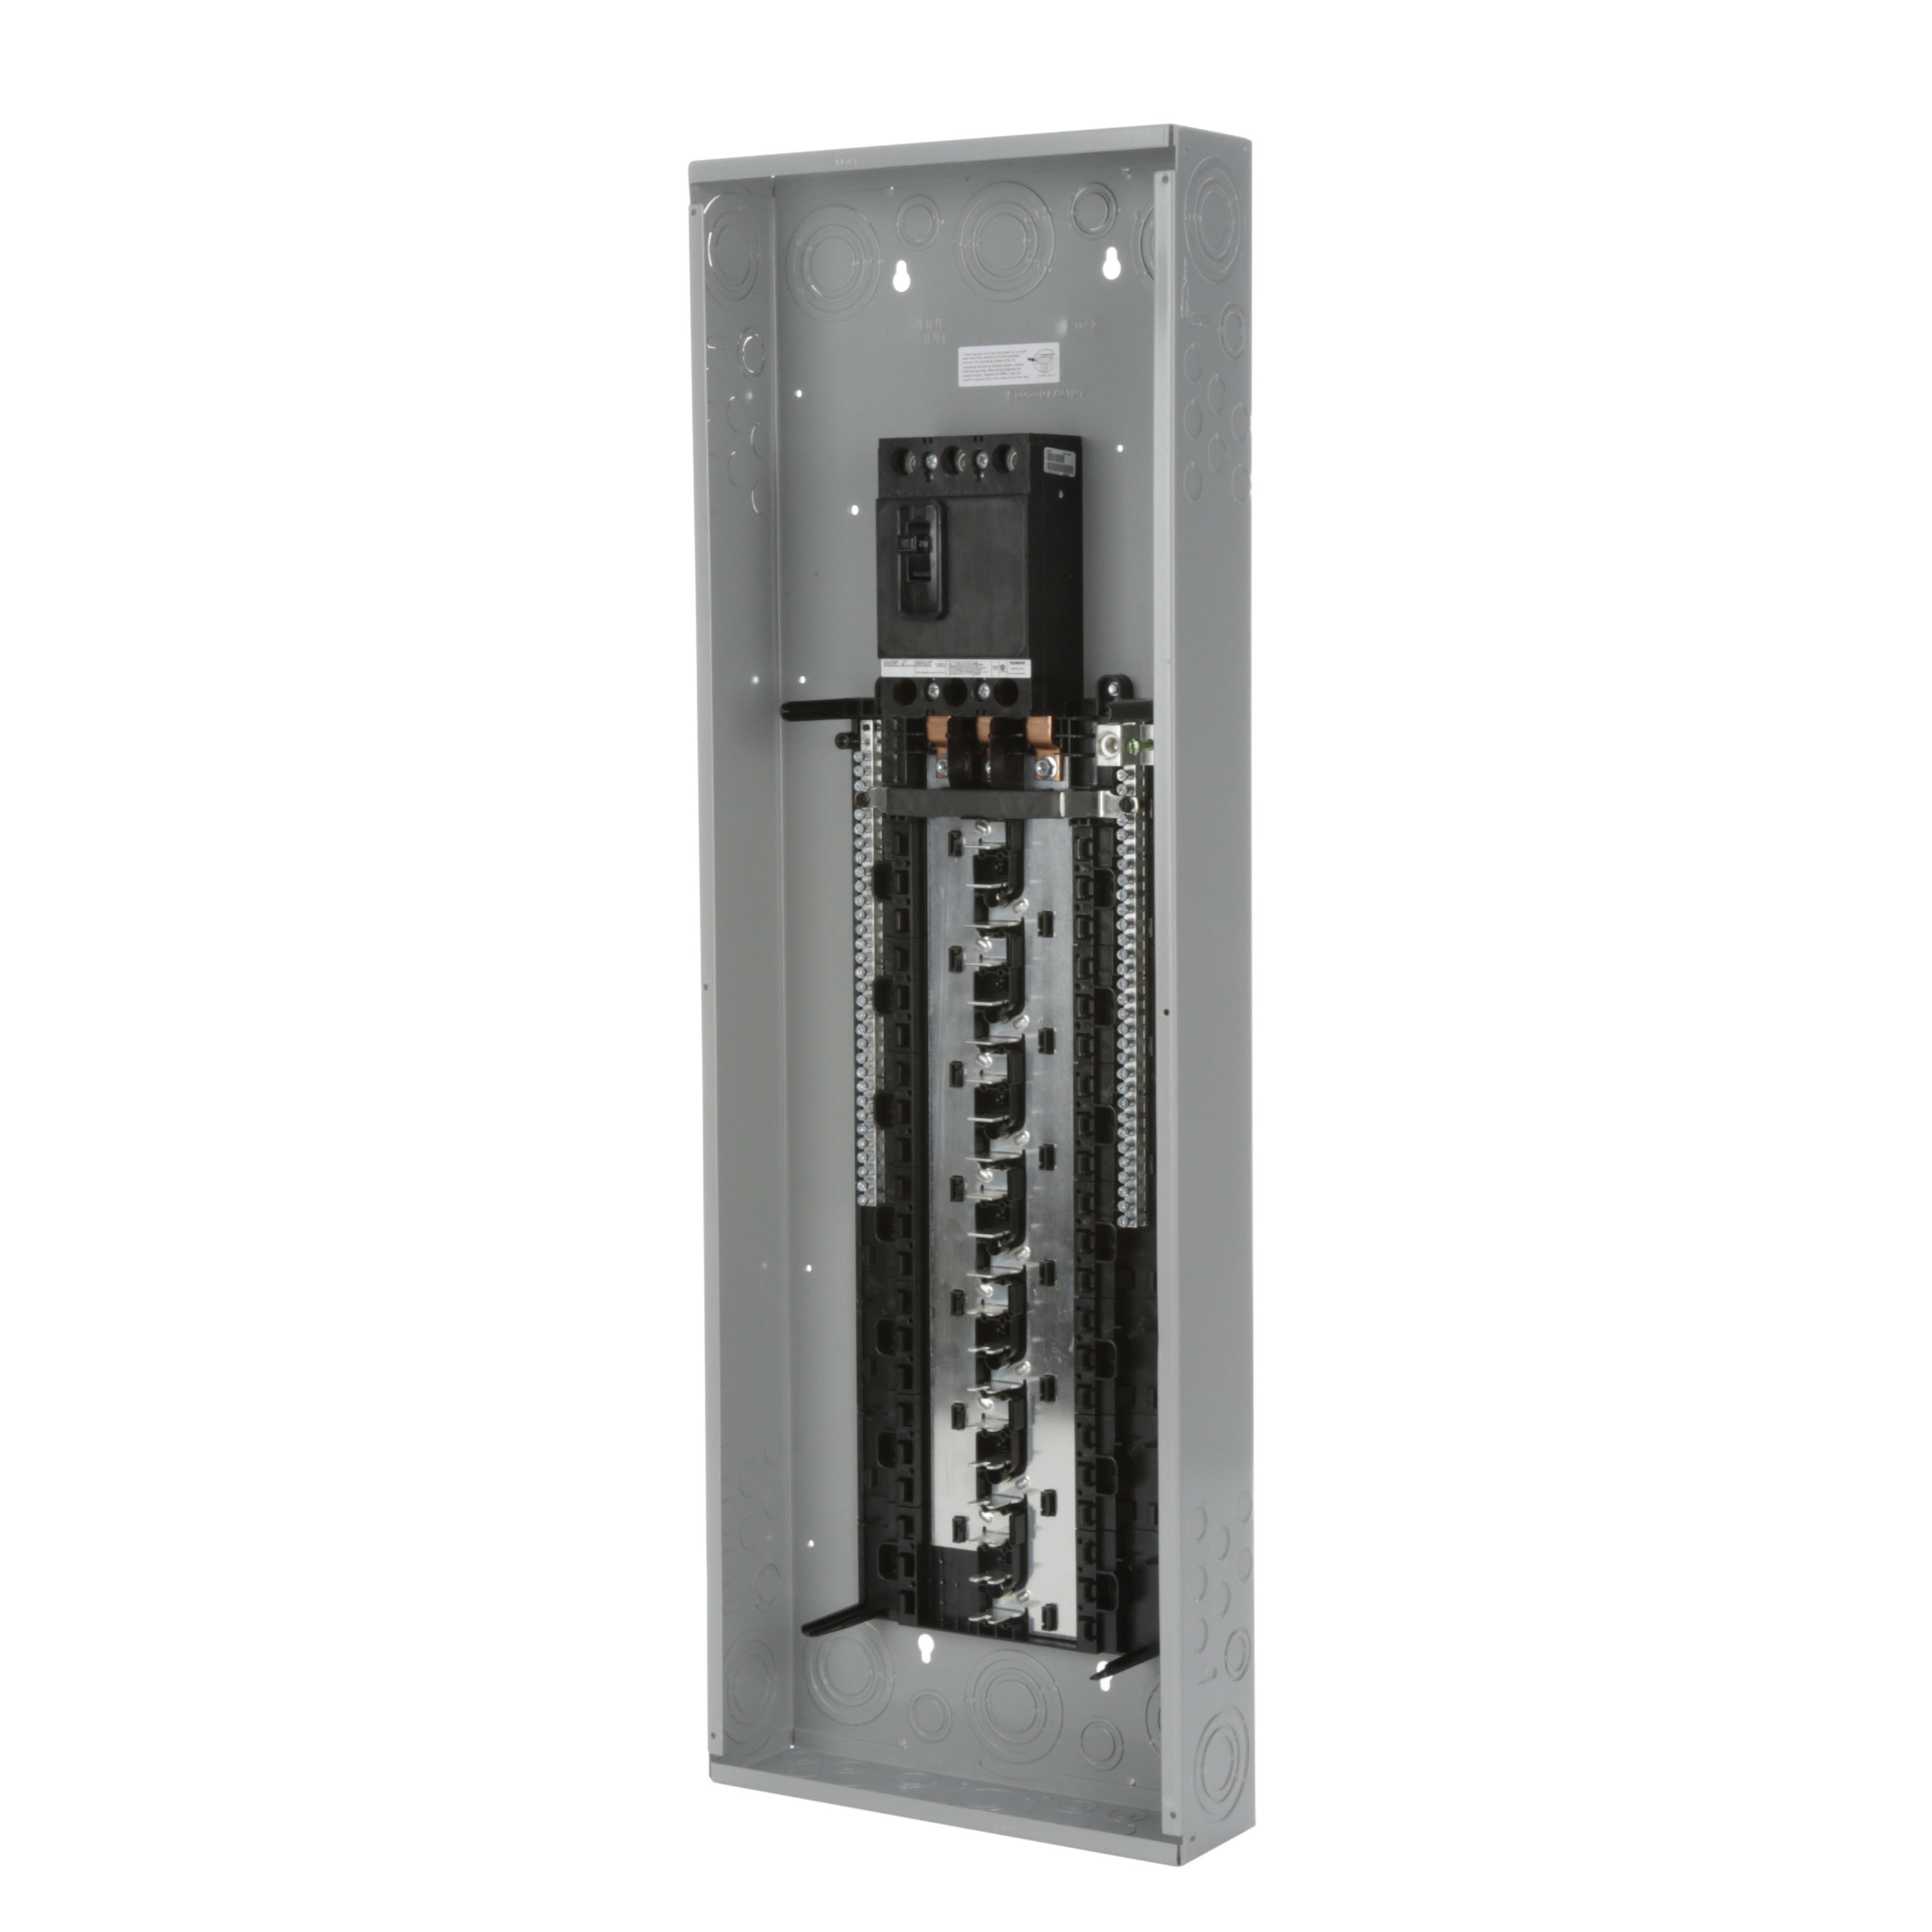 SIEMENS LOW VOLTAGE ES SERIES LOAD CENTER. FACTORY INSTALLED MAIN BREAKER WITH 42 1-INCH SPACES ALLOWING MAX 60 CIRCUITS. 3-PHASE 4-WIRE SYSTEM RATED 120/240V OR 120/208V (200A) 10KA INTERRUPT. SPECIAL FEATURES ALUMINUM BUS, GRAY TRIM, NEMA TYPE1 ENCLOSURE FOR INDOOR USE.